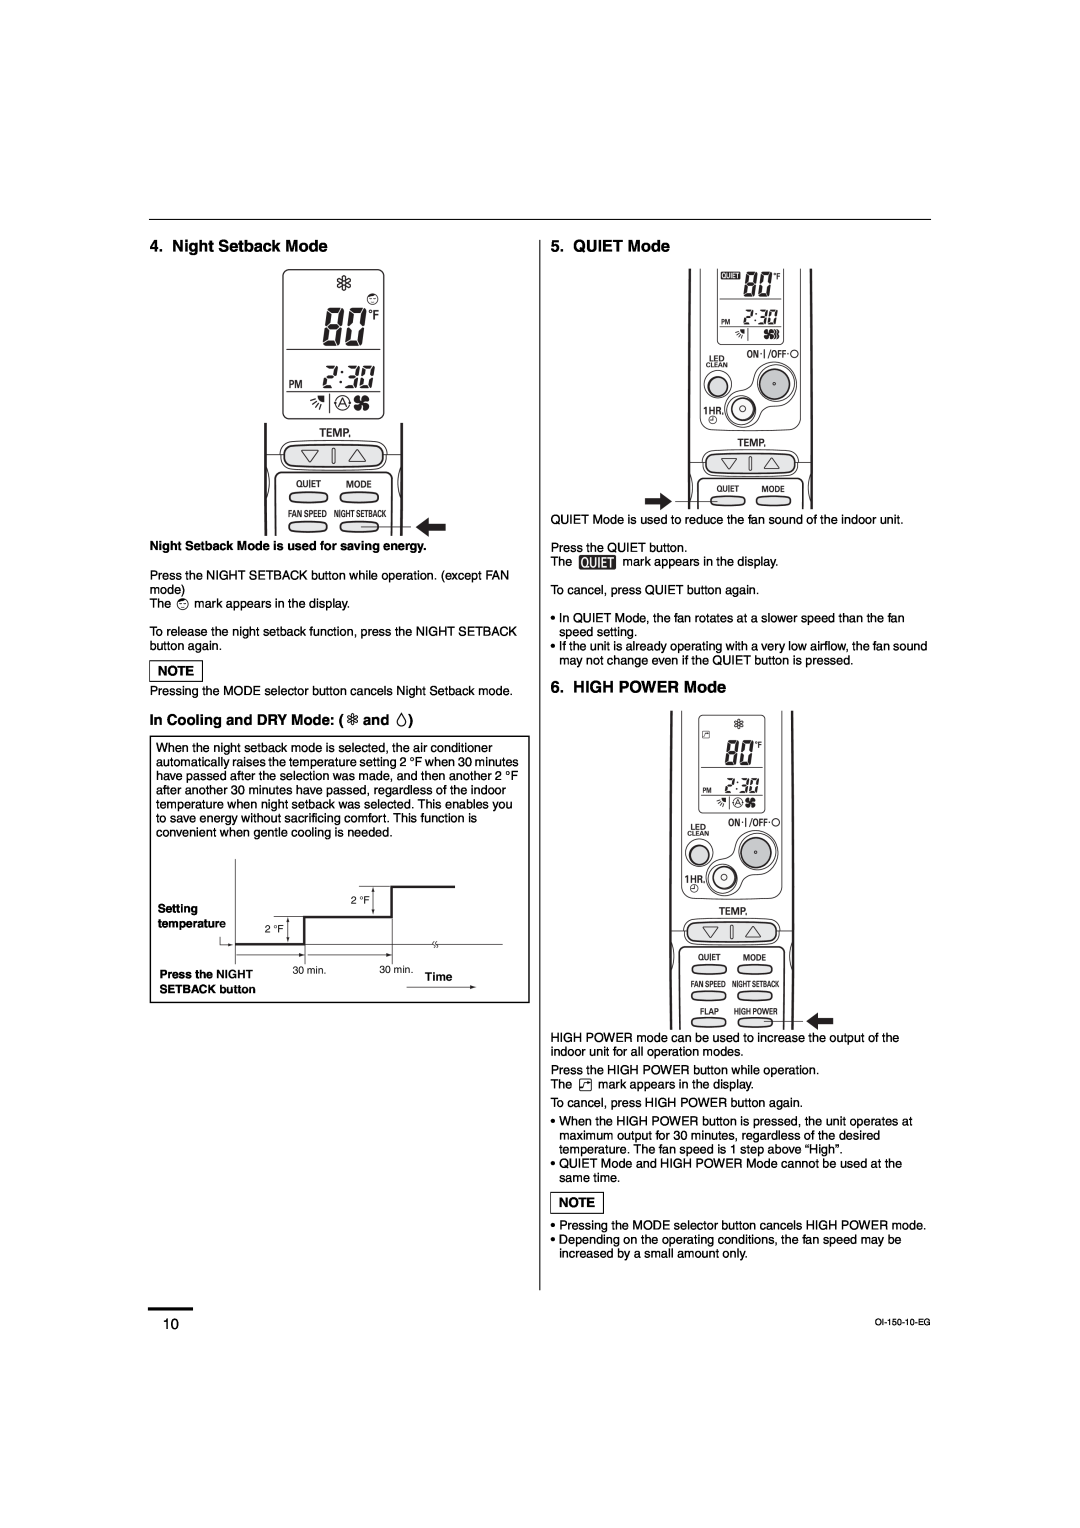 Sanyo C3082, C3682 service manual Night Setback Mode, QUIET Mode, HIGH POWER Mode, In Cooling and DRY Mode and 